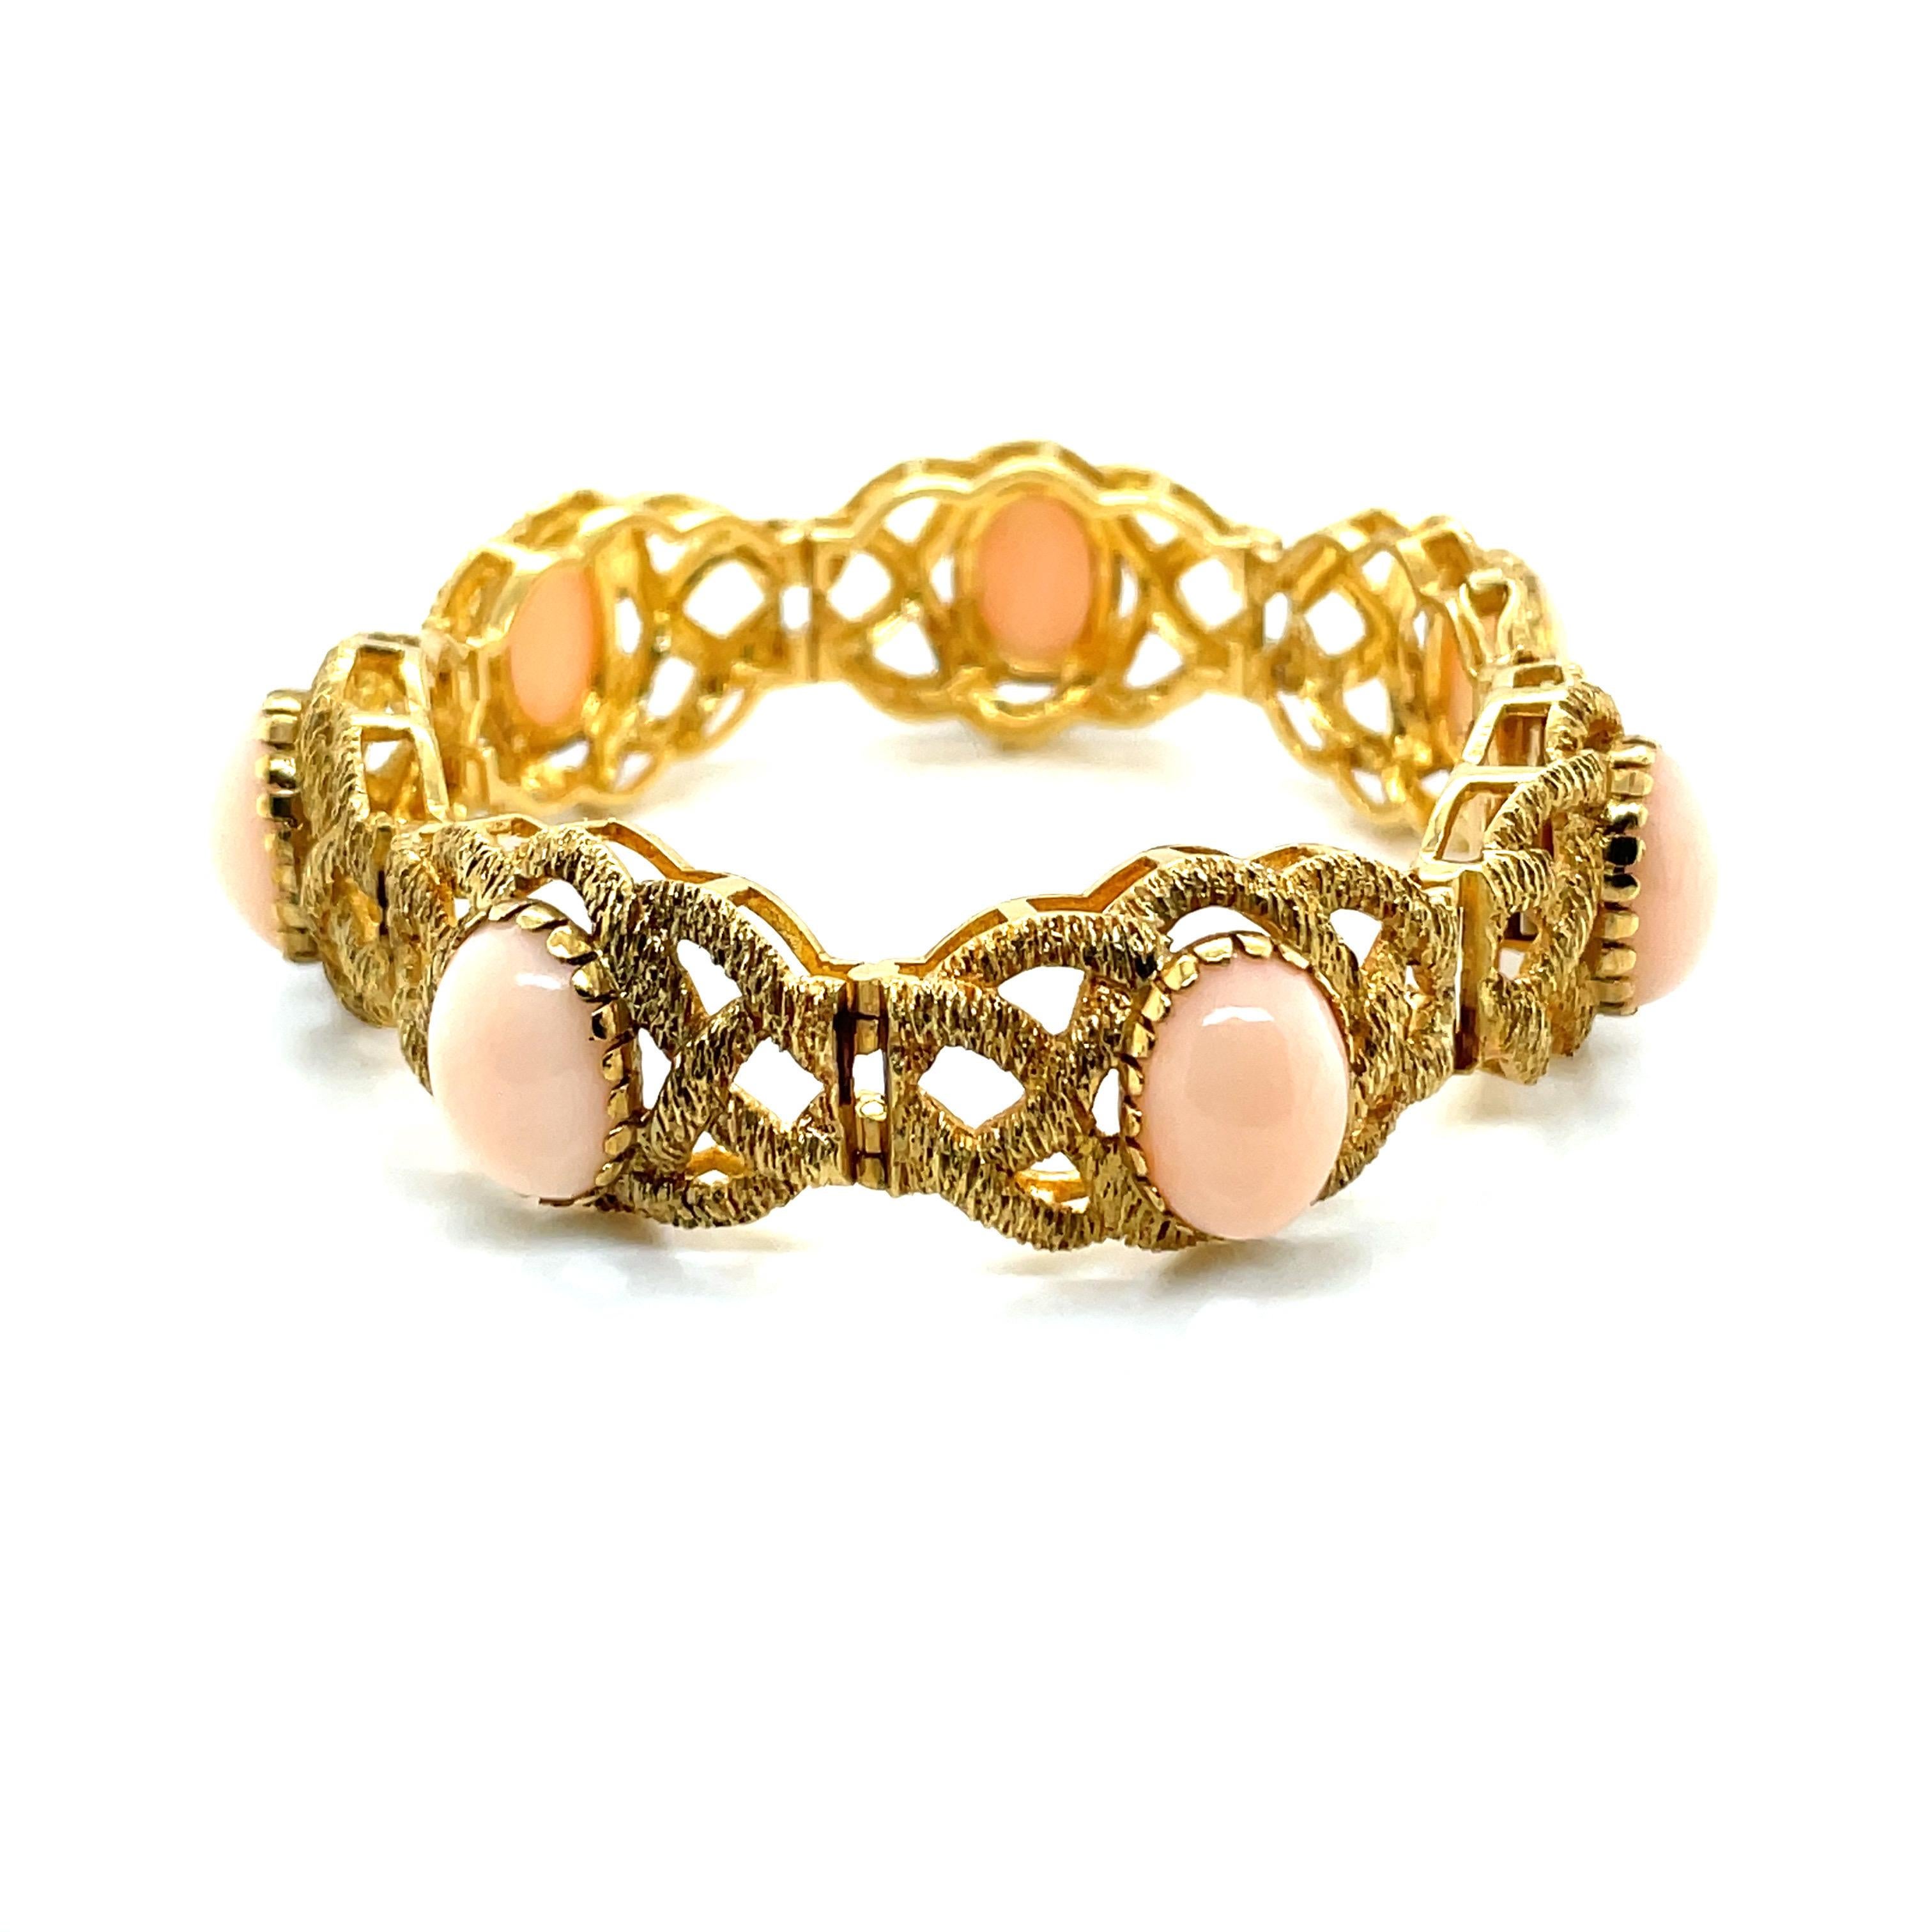 This exquisite vintage bracelet is a true embodiment of Italian artisanal mastery. Crafted from luxurious 18K yellow gold, as denoted by the 